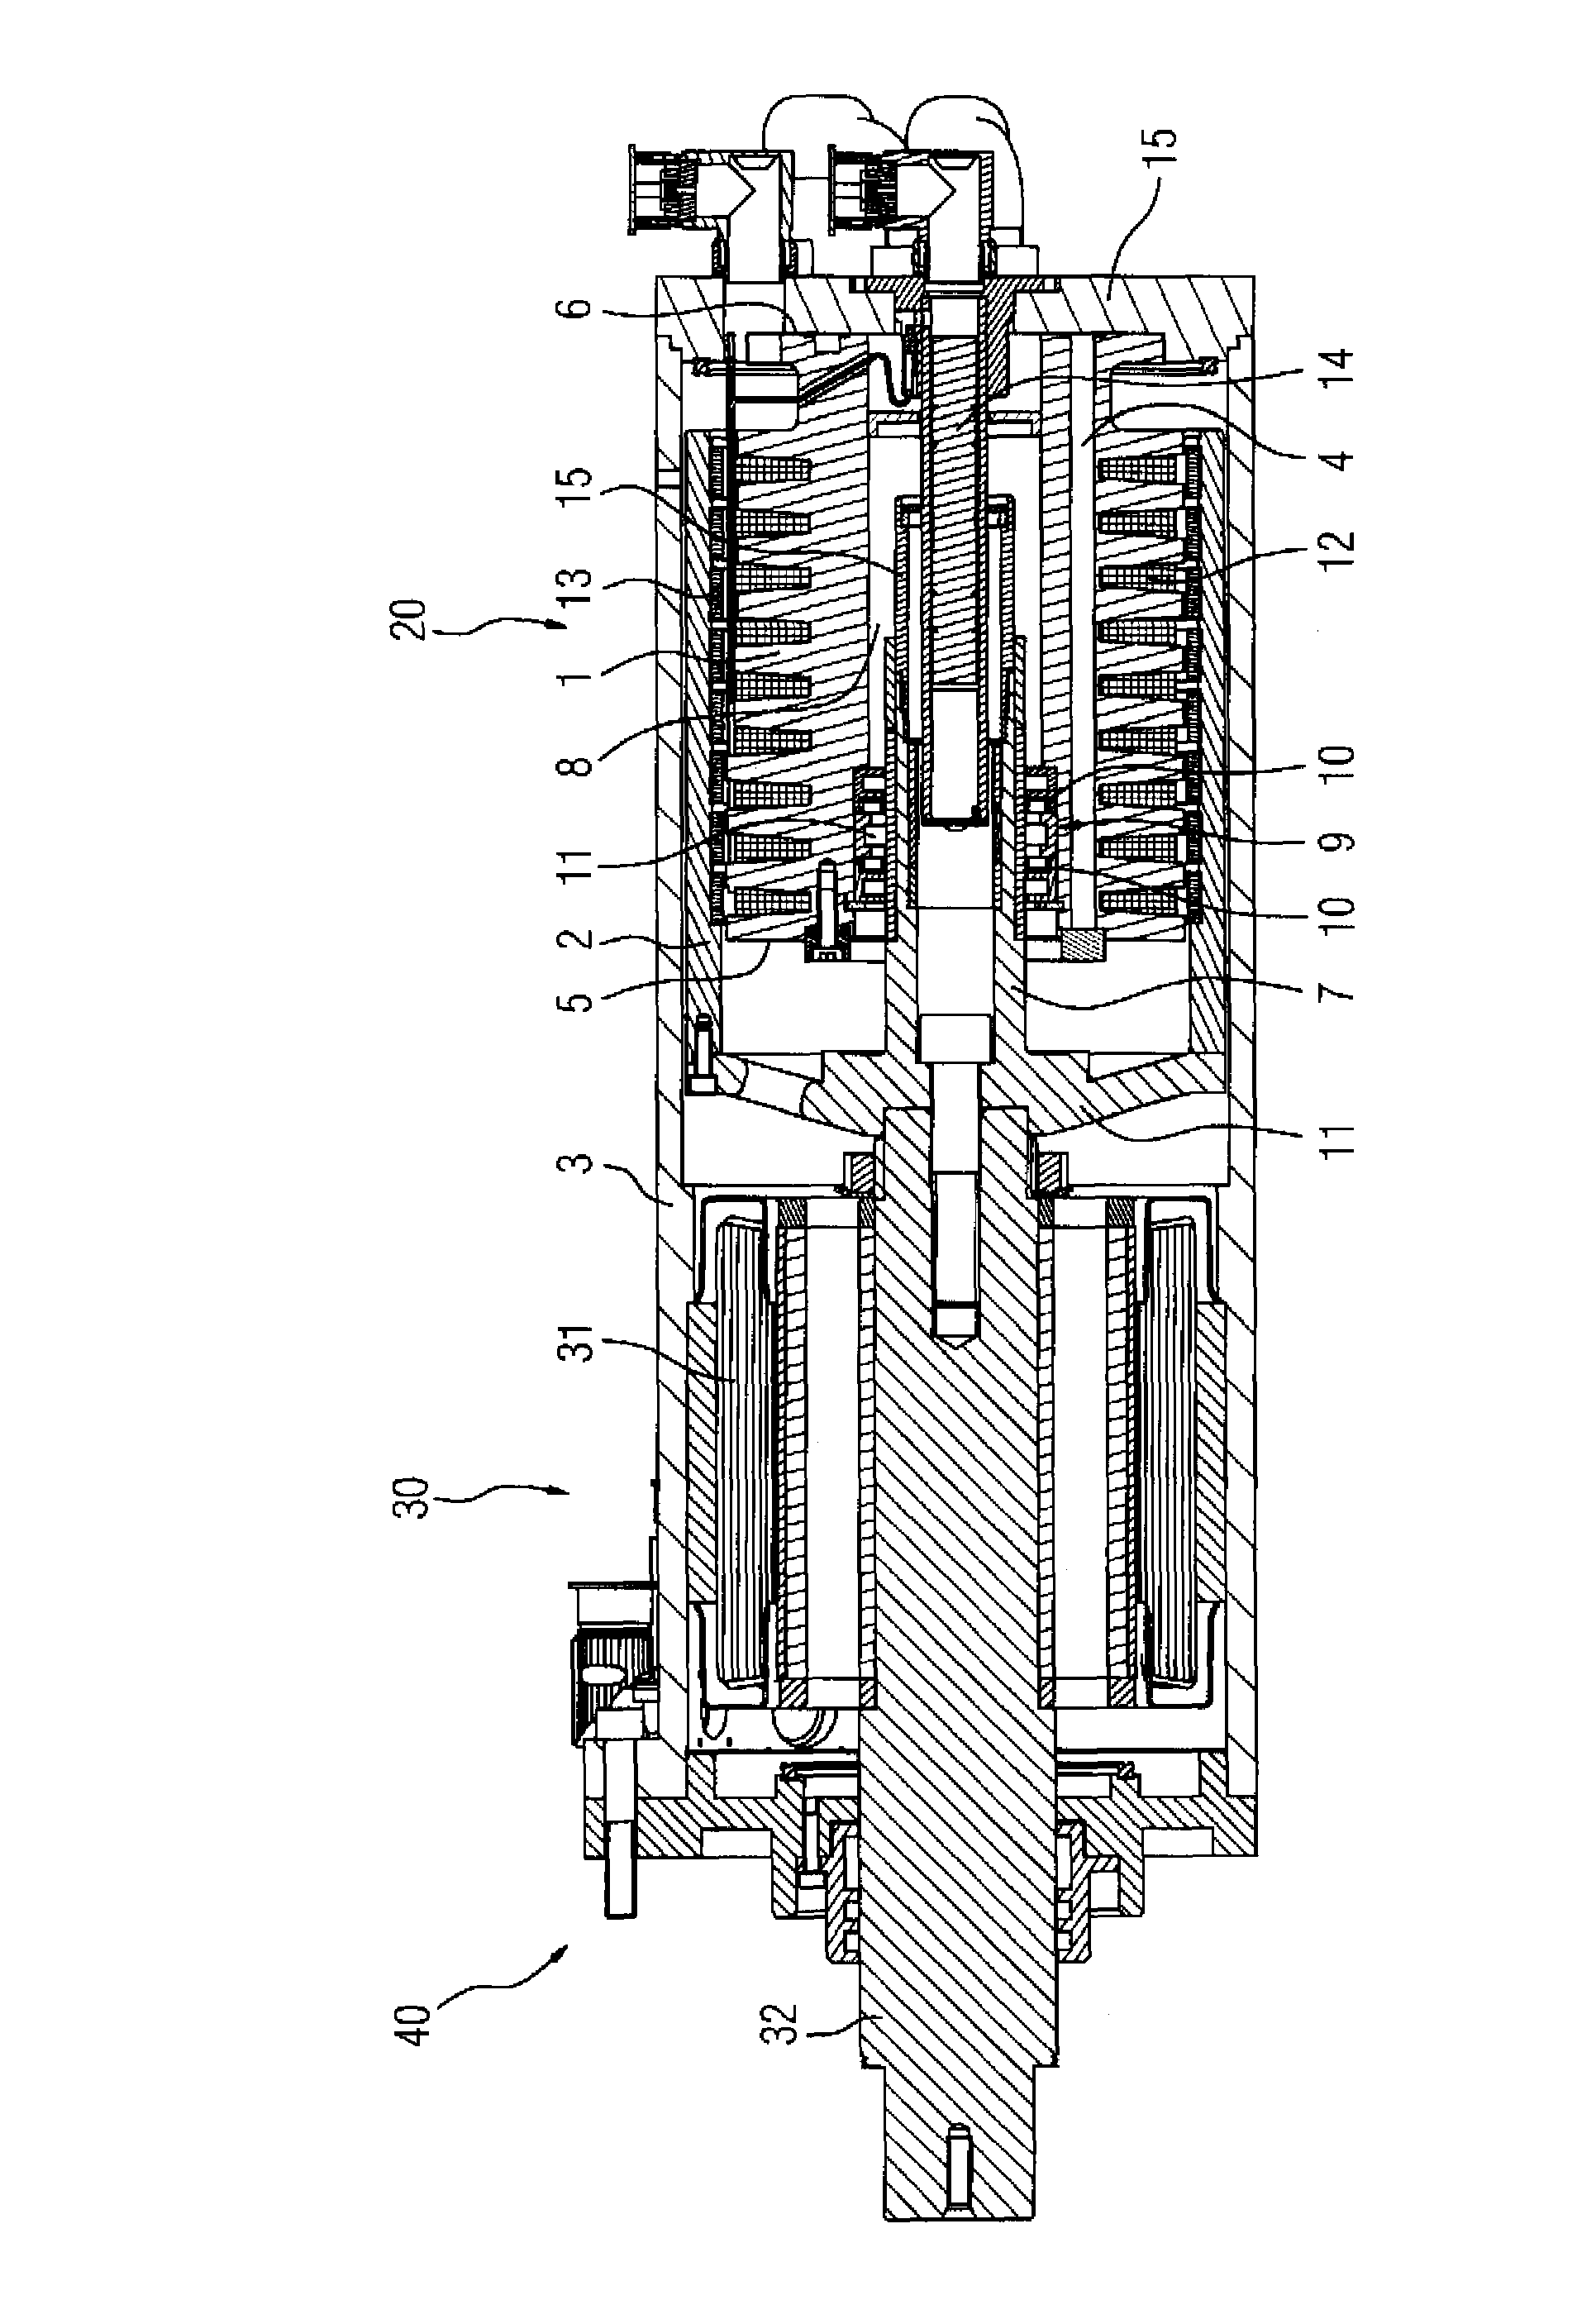 Electric machine having a rotary and a linear actuator